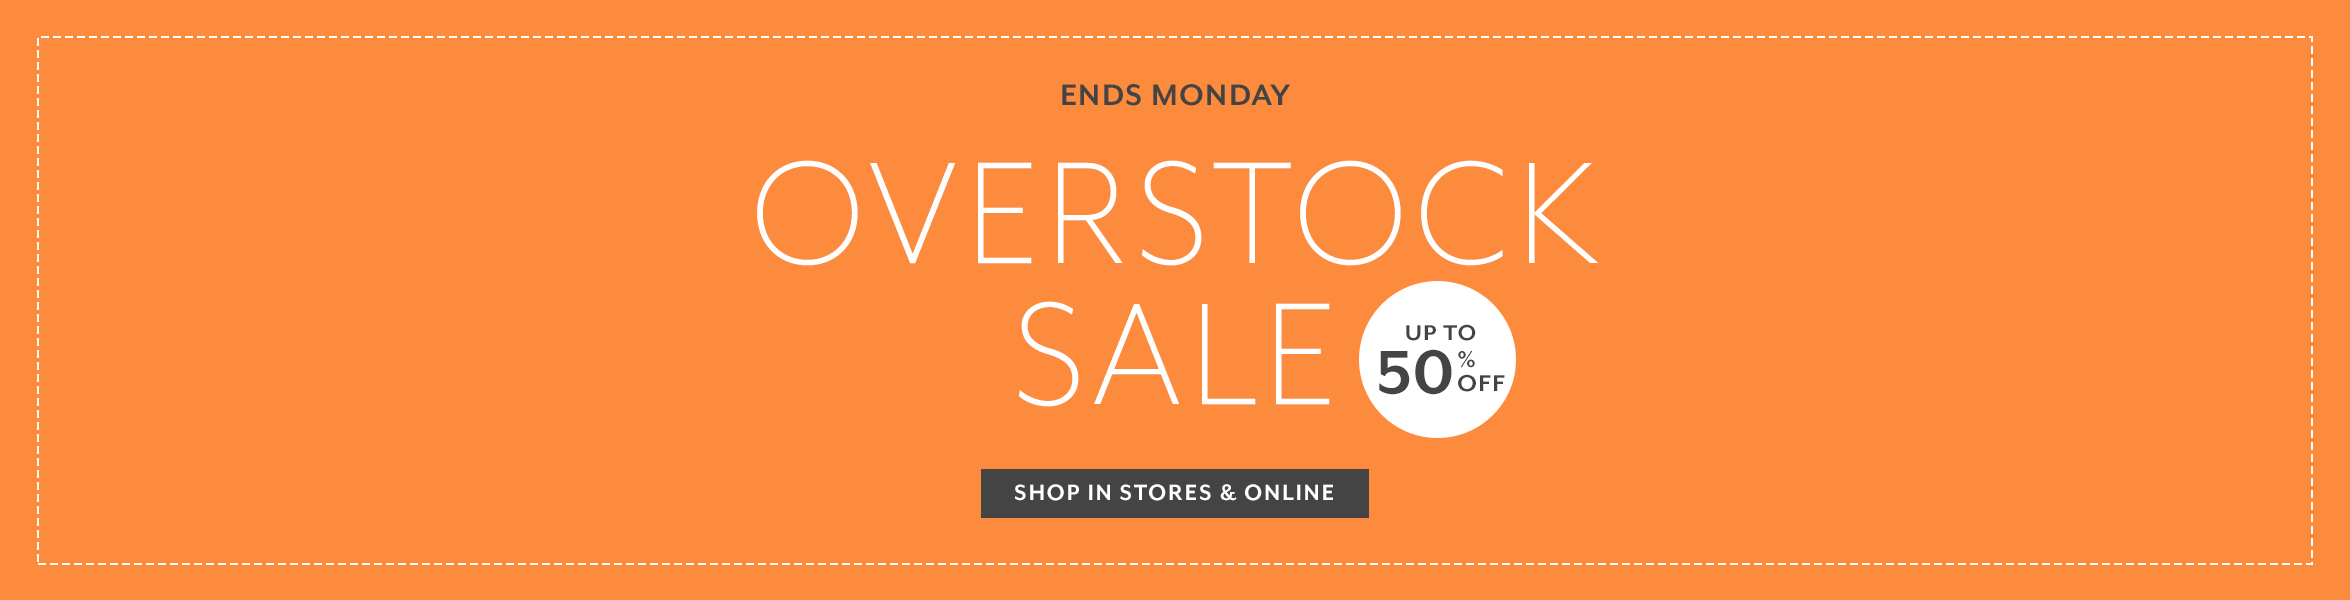 Ends Monday Overstock Sale up to 50% off, shop in stores and online